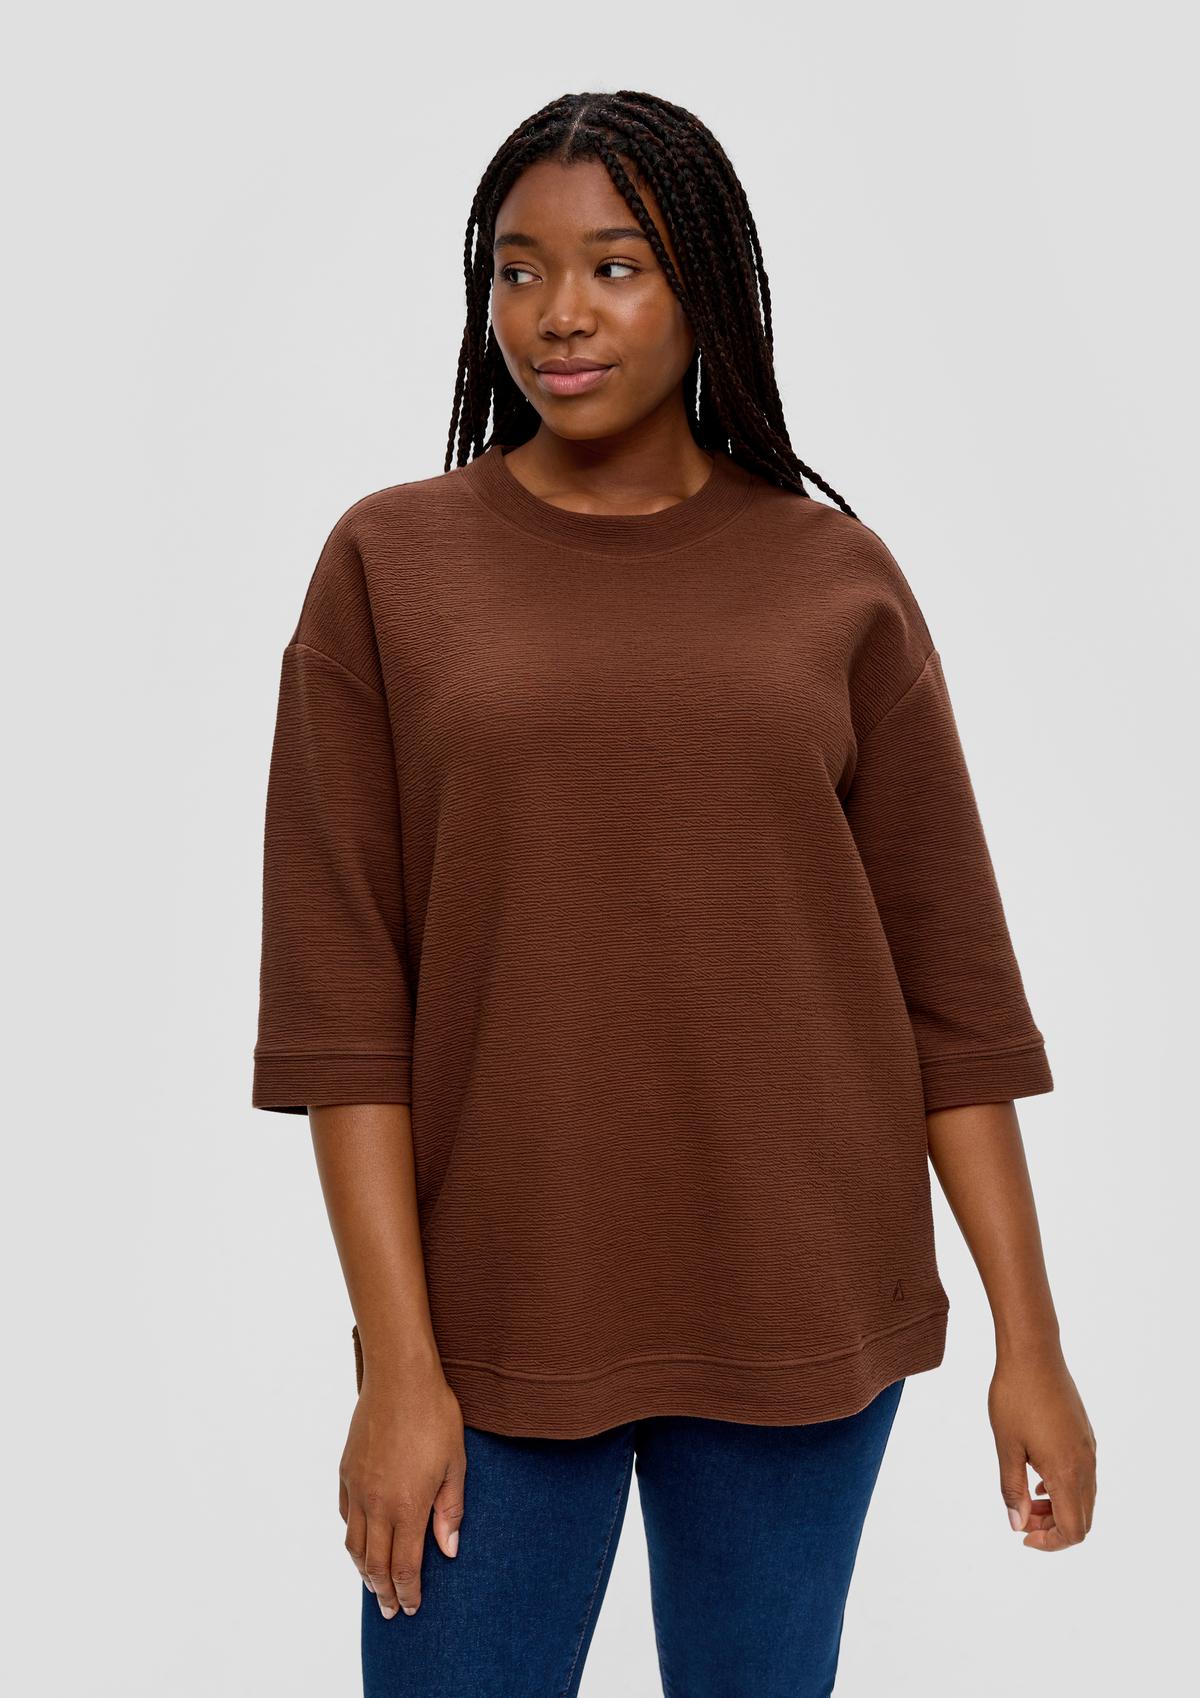 s.Oliver Sweatshirt with a crinkled texture